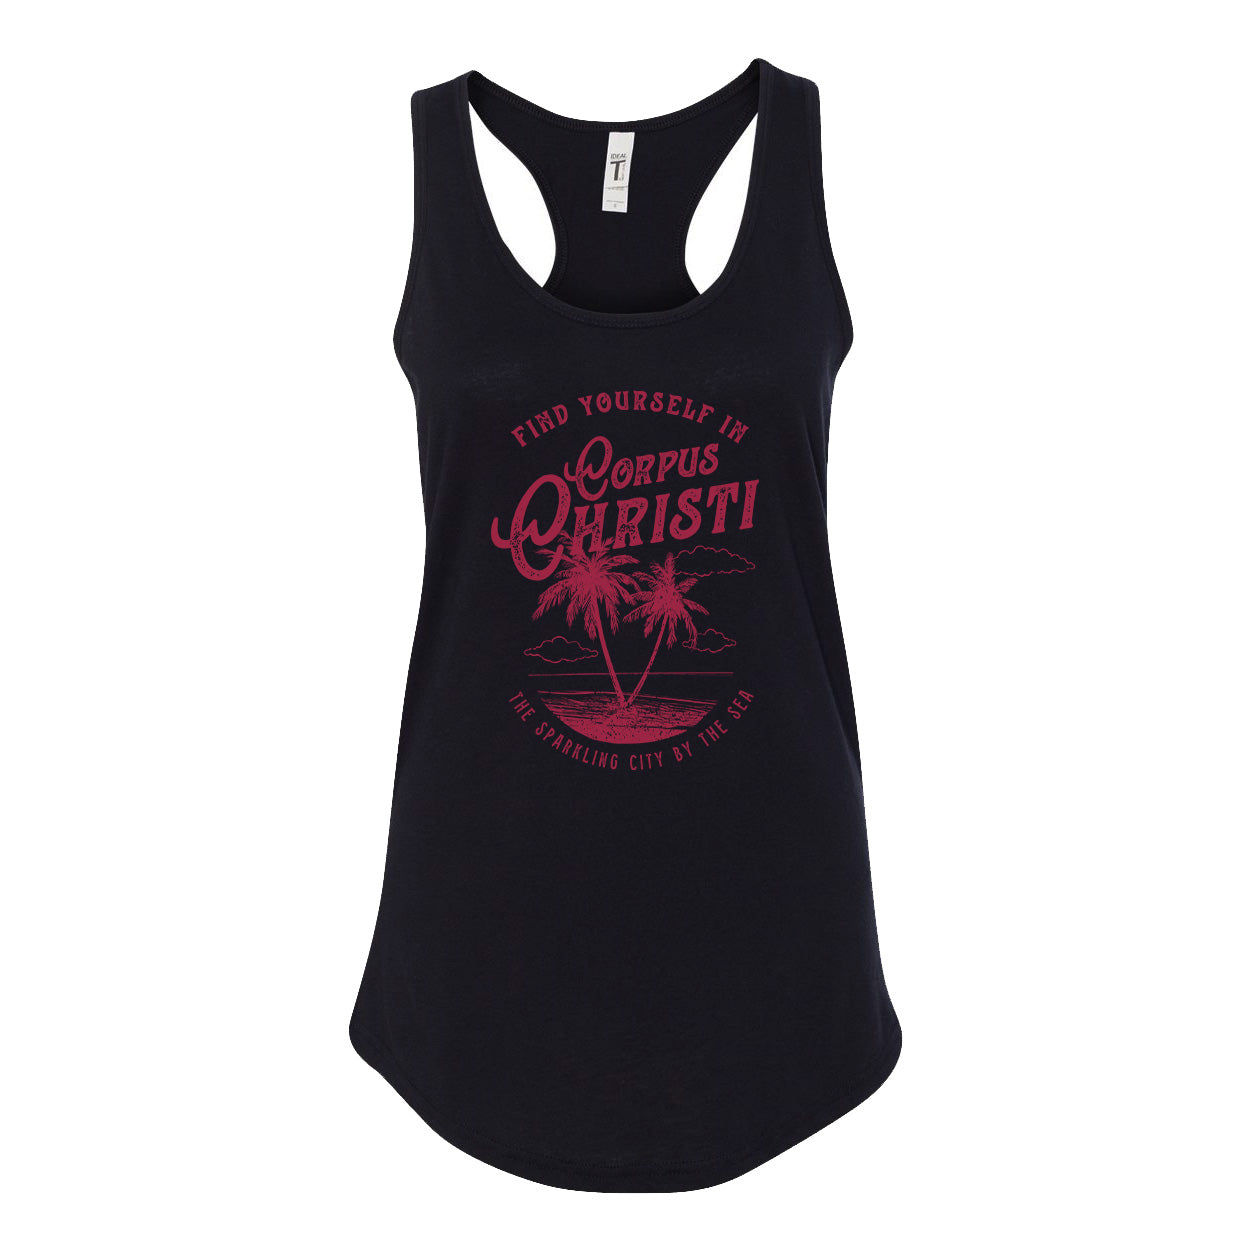 Find Yourself in CC Racerback Tank